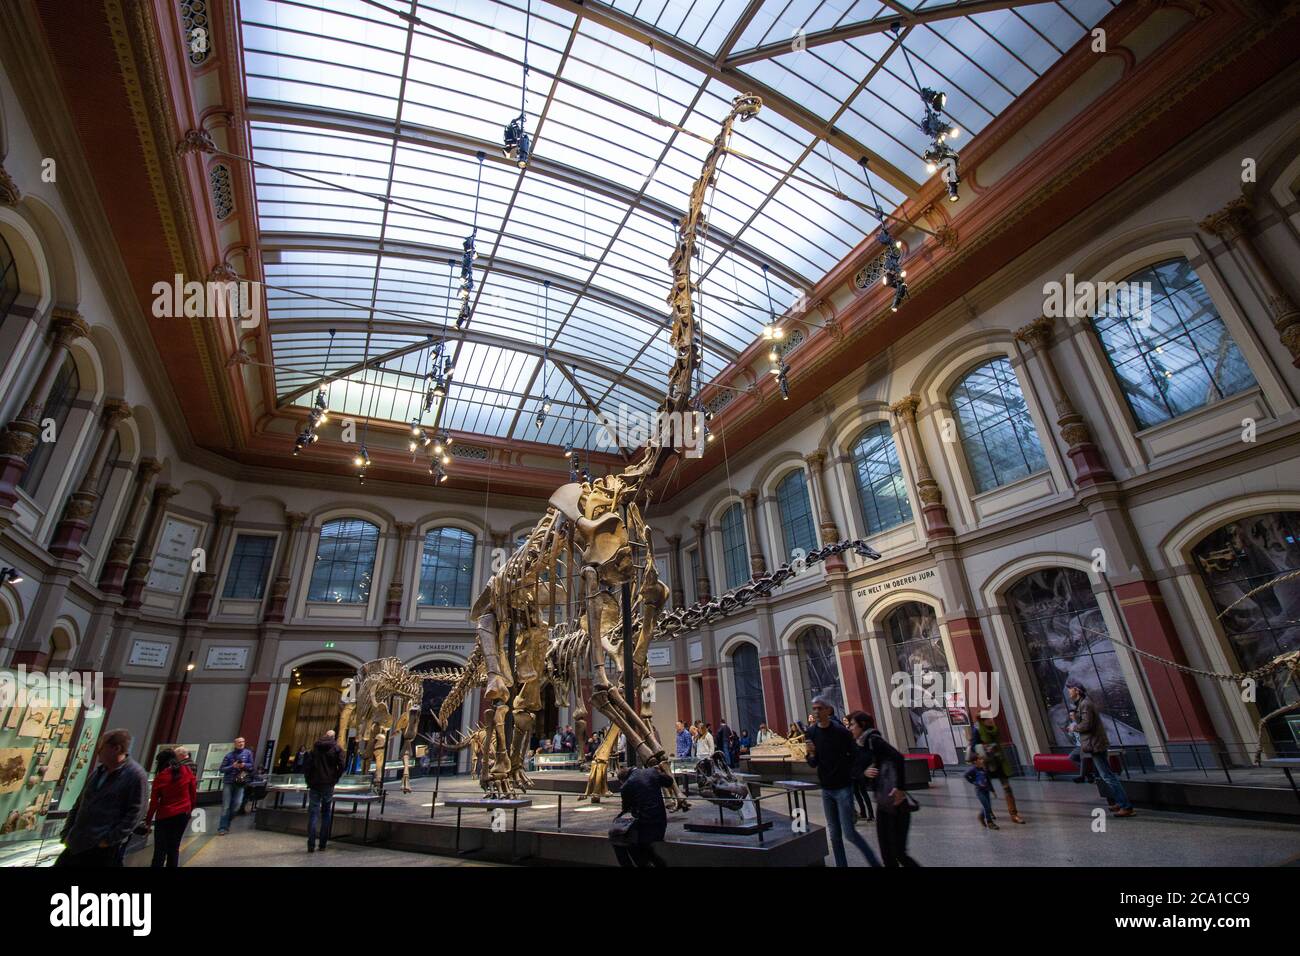 Giant skeletons of Brachiosaurus and Diplodocus in Dinosaur Hall. Natural History museum, established in 1810, houses millions paleontological specime Stock Photo